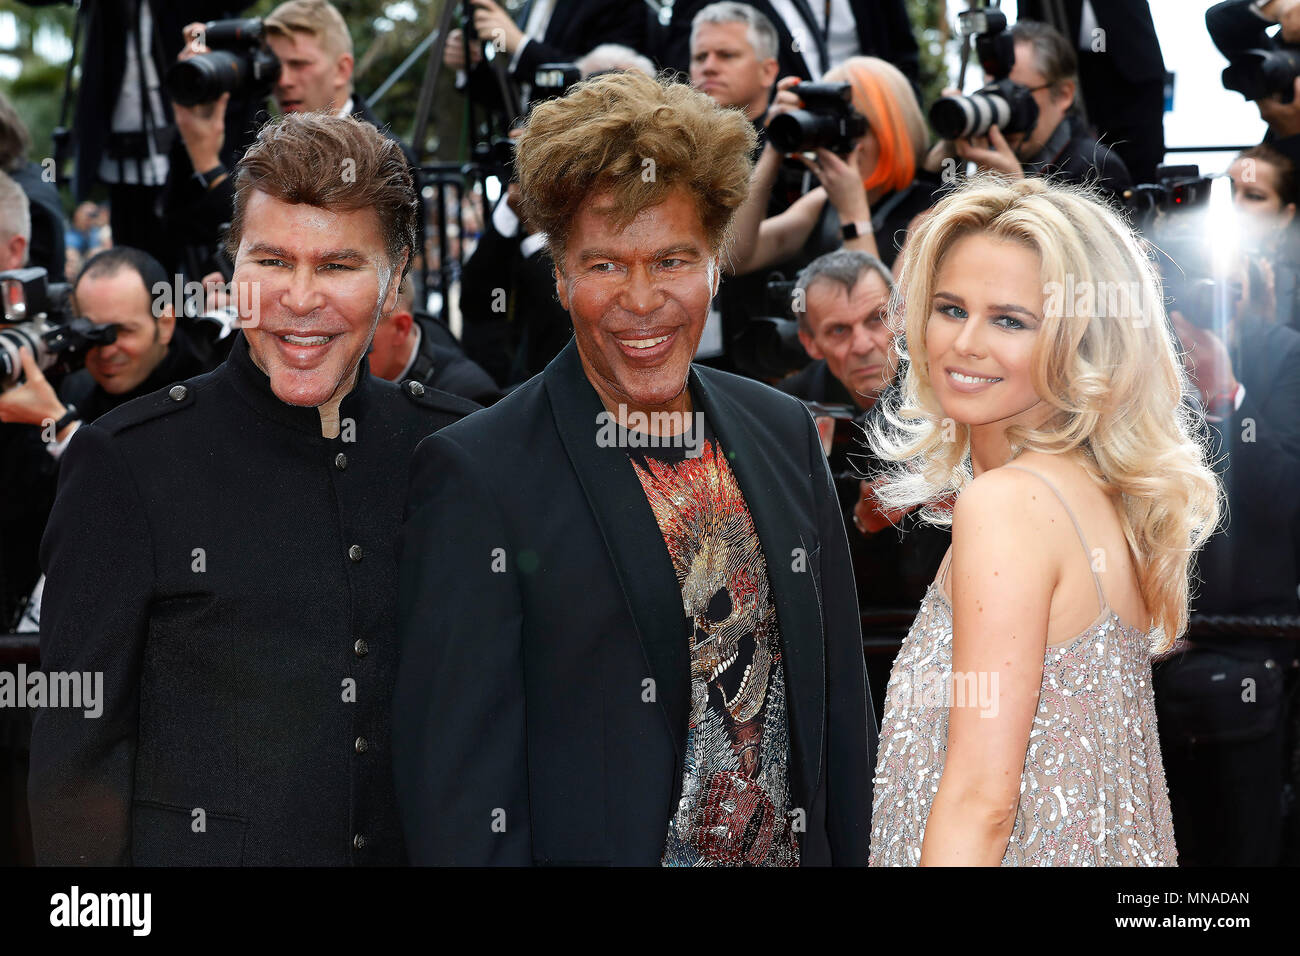 Cannes, France. 15th May 2018. Cannes, France. 15th May 2018. Grichka Bogdanoff, Igor Bogdanoff and Julie Jardon at work at the Solo: 'A Star Wars Story' premiere during the 71st Cannes Film Festival at the Palais des Festivals on May 15, 2018 in Cannes, France. Credit: John Rasimus/Media Punch ***FRANCE, SWEDEN, NORWAY, DENARK, FINLAND, USA, CZECH REPUBLIC, SOUTH AMERICA ONLY*** Credit: MediaPunch Inc/Alamy Live News Stock Photo